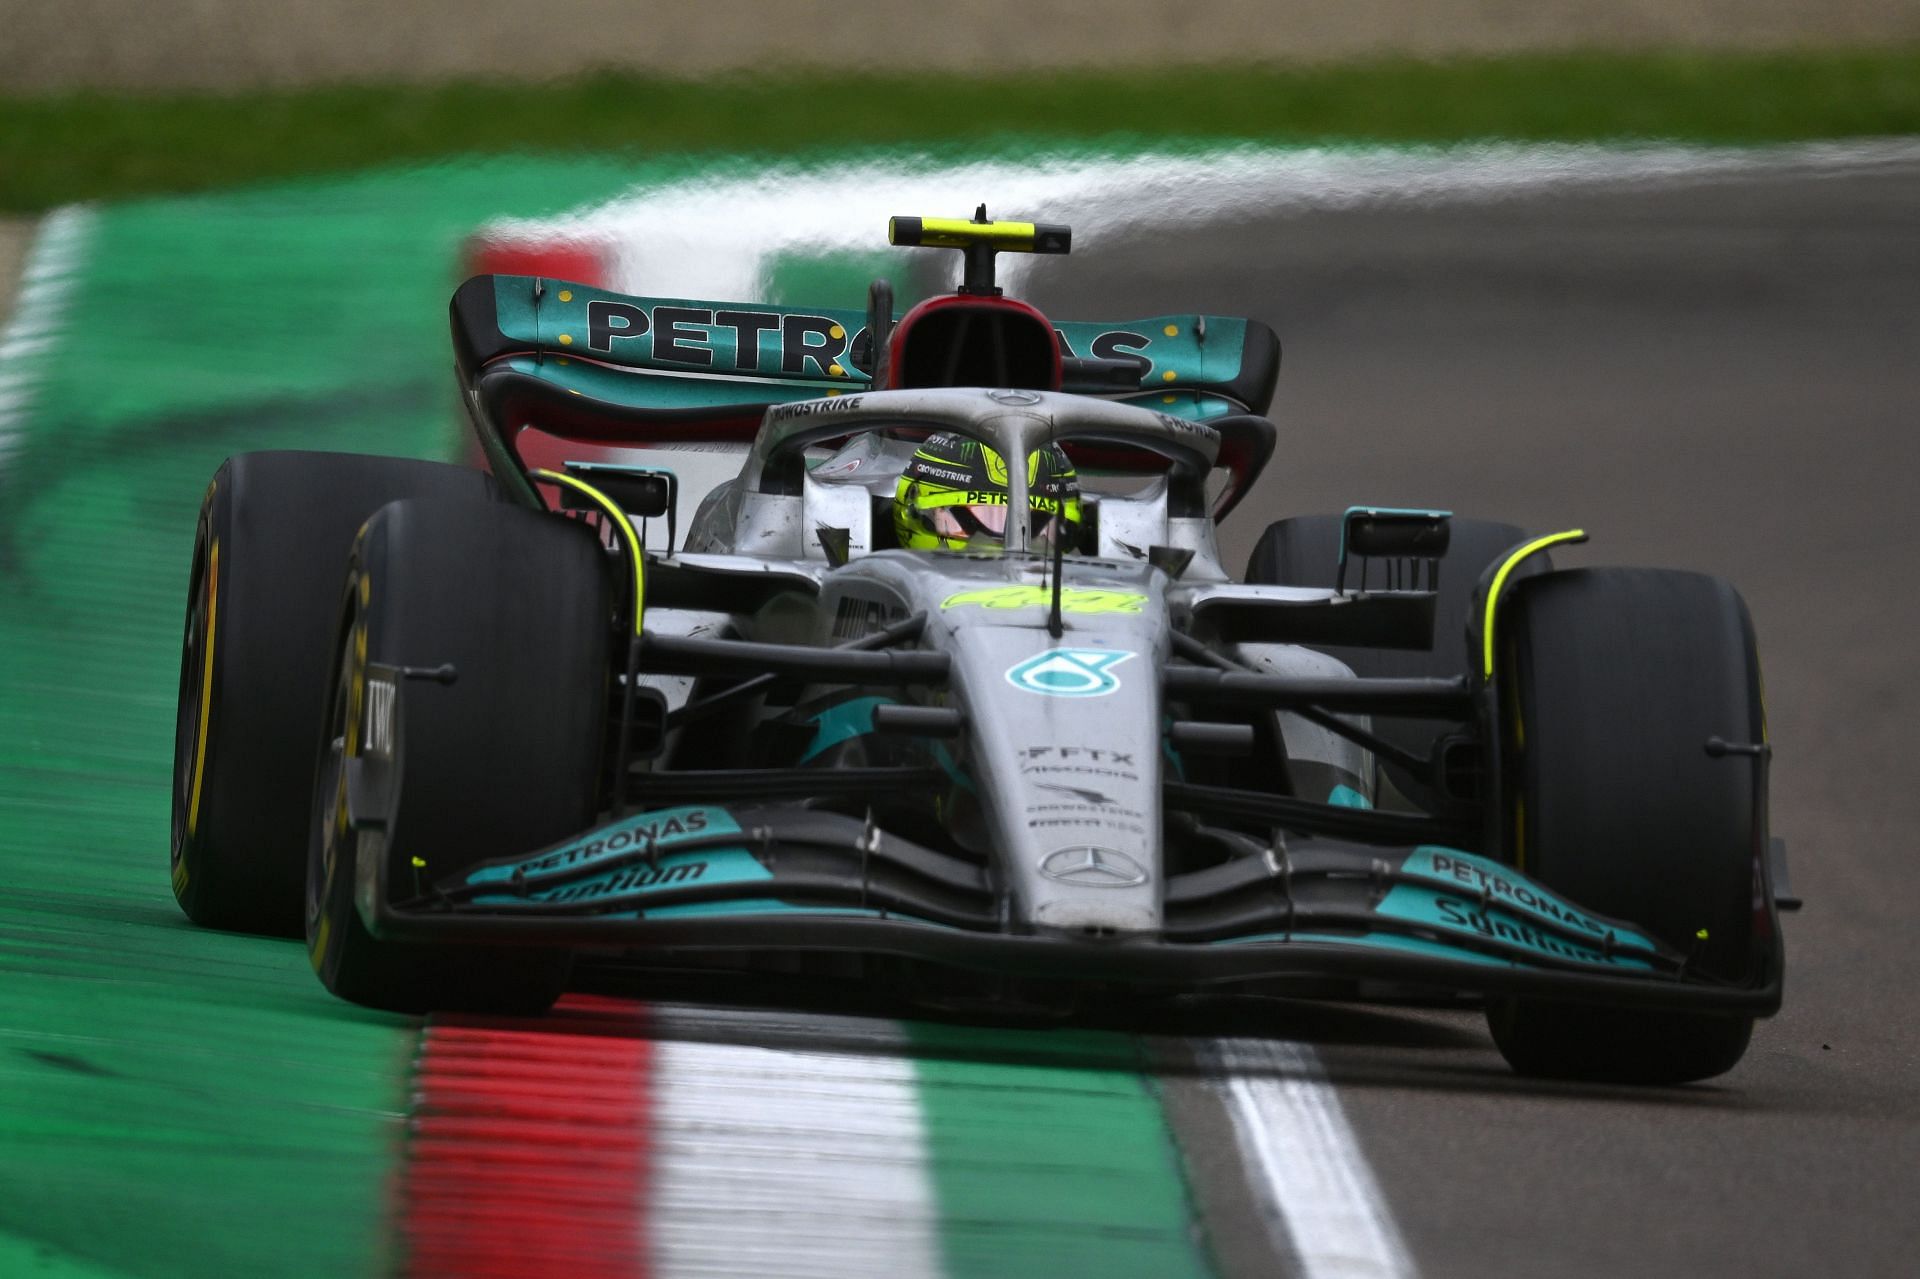 Lewis Hamilton was stuck in P13 at the Imola GP